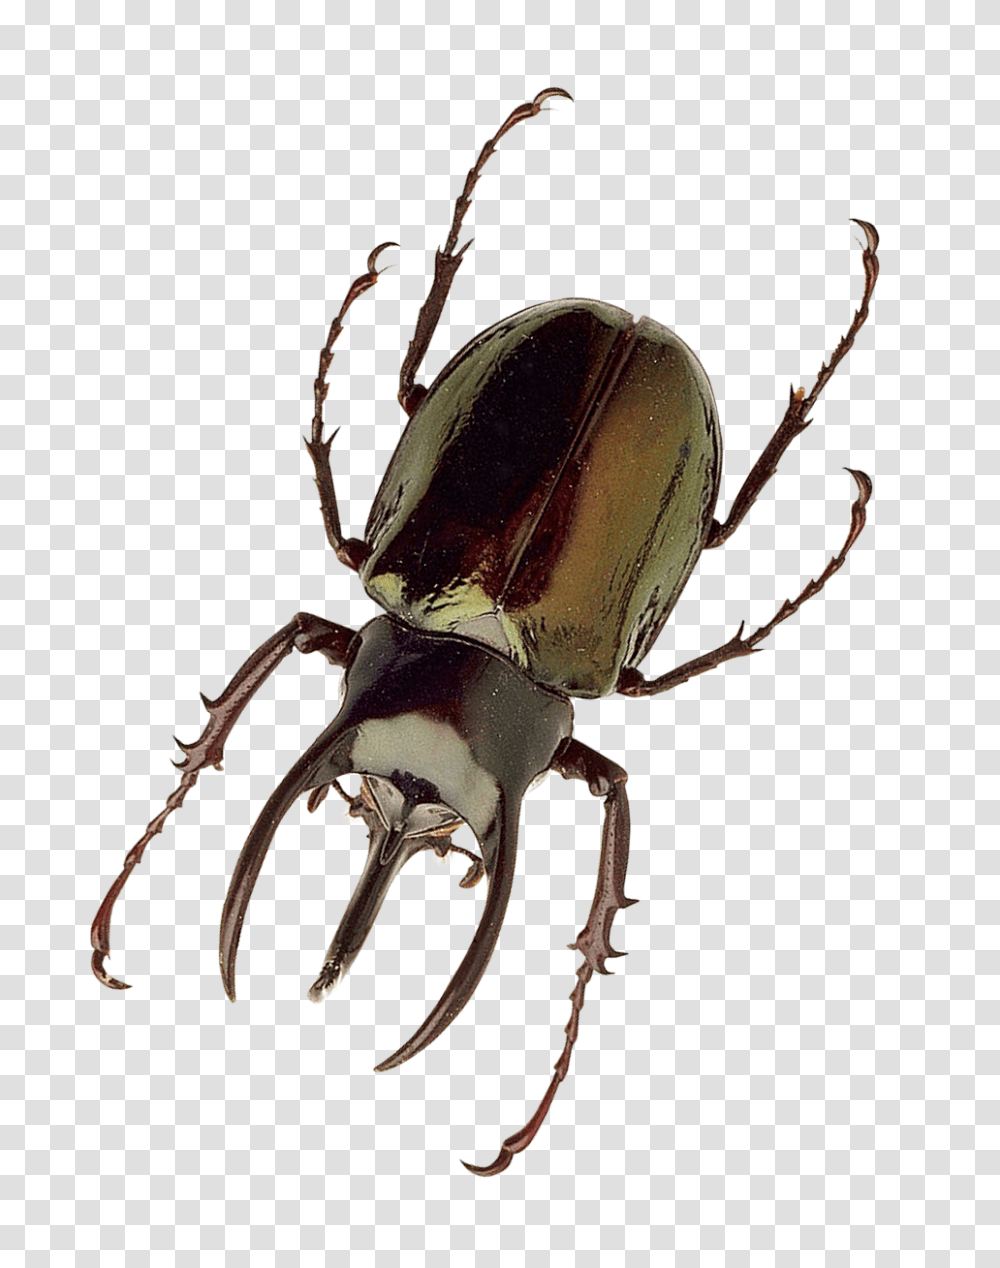 Insect Image, Invertebrate, Animal, Dung Beetle, Bow Transparent Png